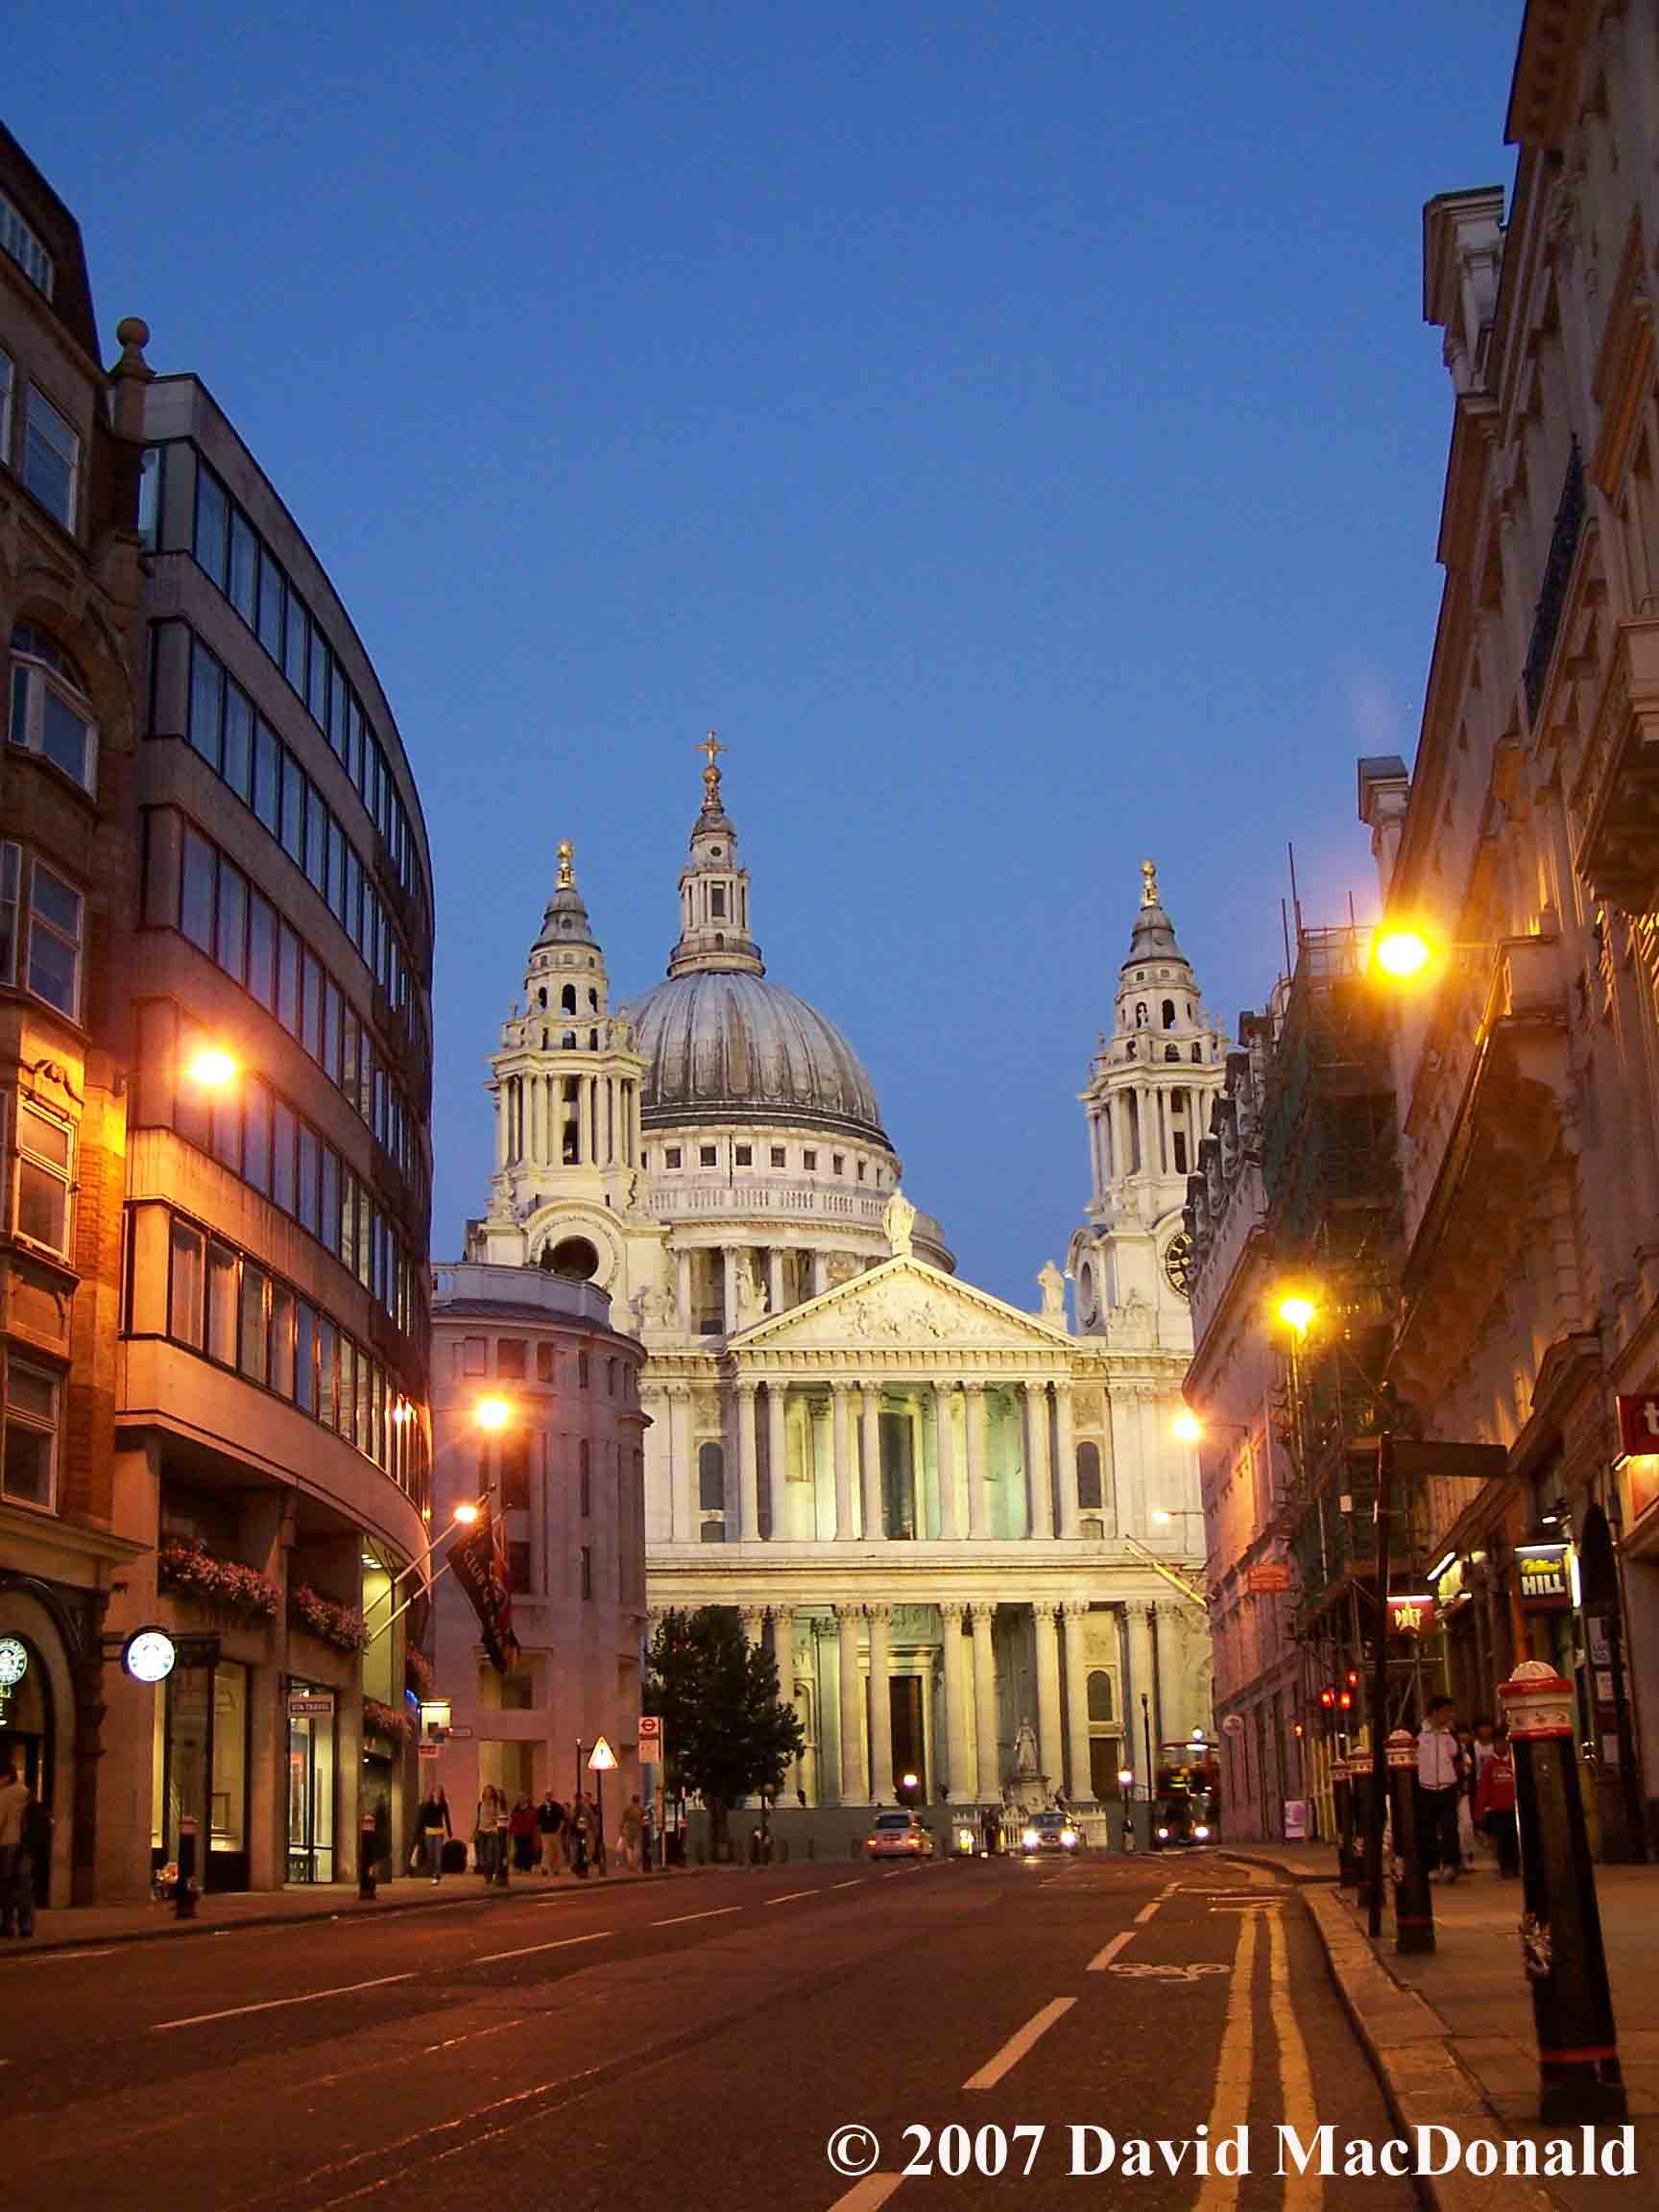 St. Paul's Cathedral at dusk